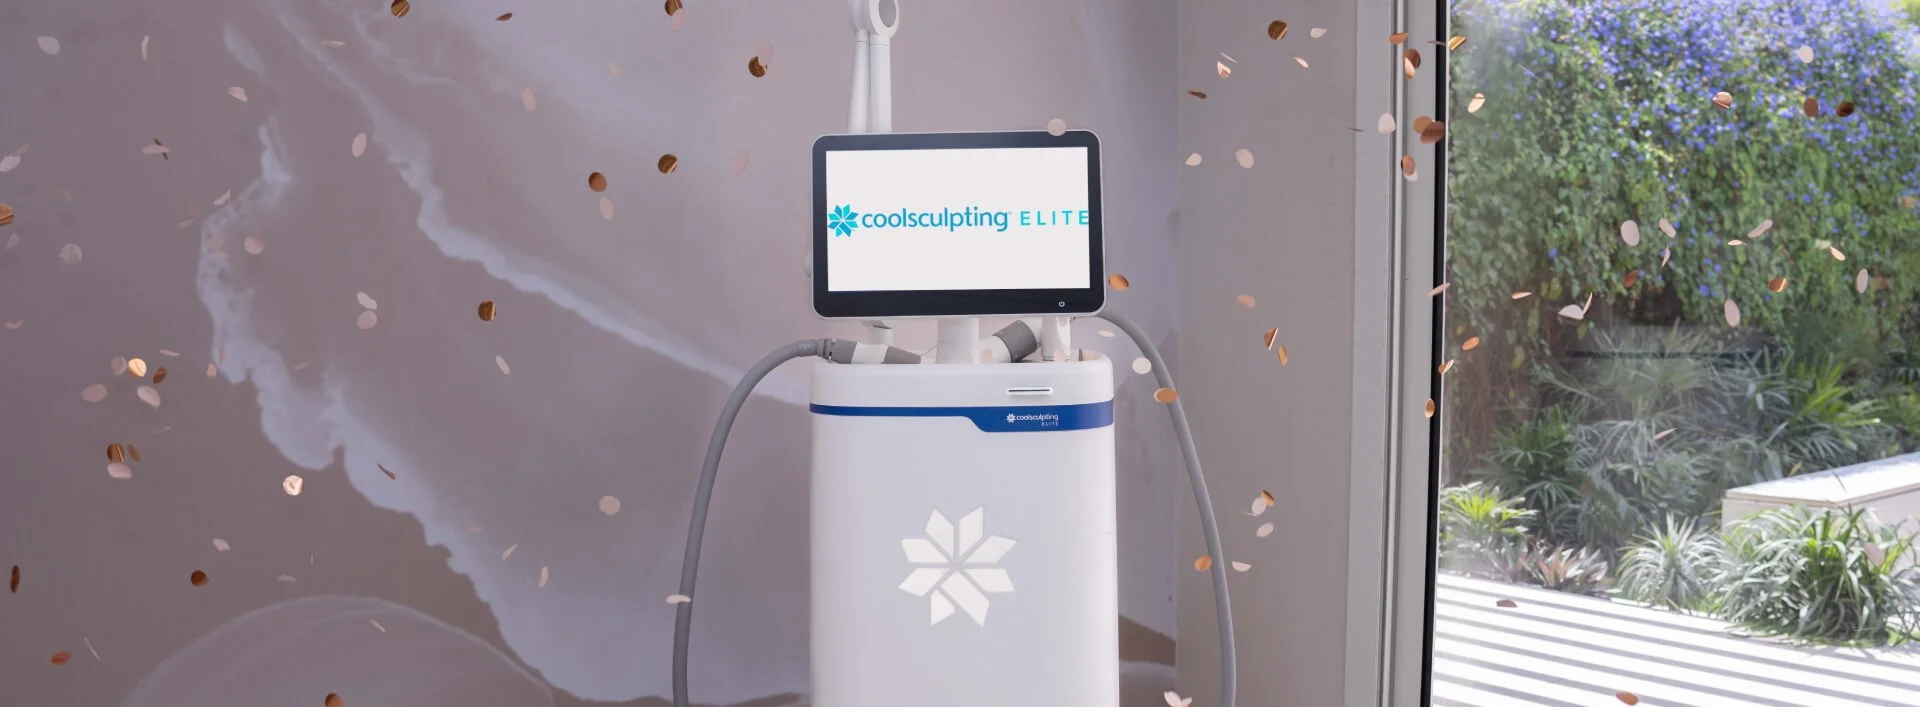 CoolSculpting ELITE revolutionary body sculpting procedure - get slimmer contours, by eliminating stubborn fat pockets with this latest fat-freezing treatment.